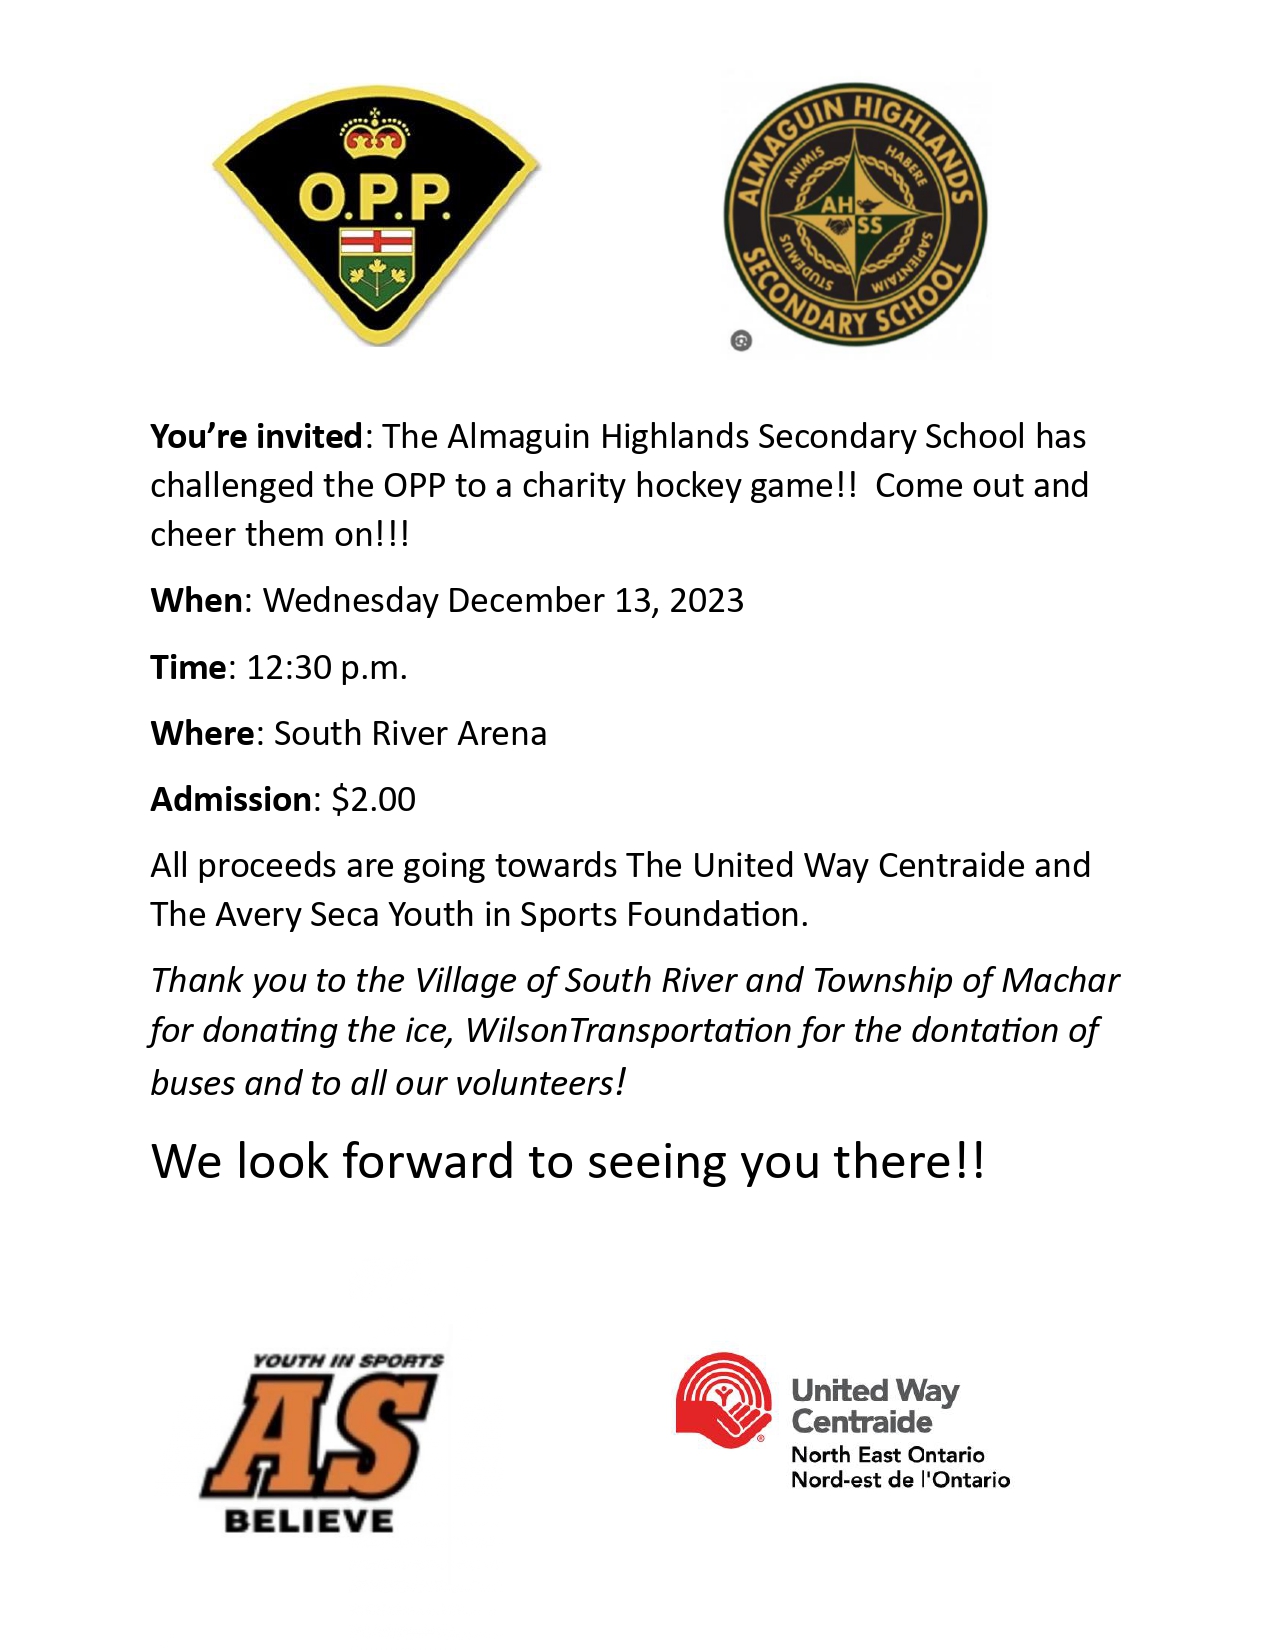 Poster Advertising the Almaguin Highlands Secondary School against the OPP in a Hockey match.